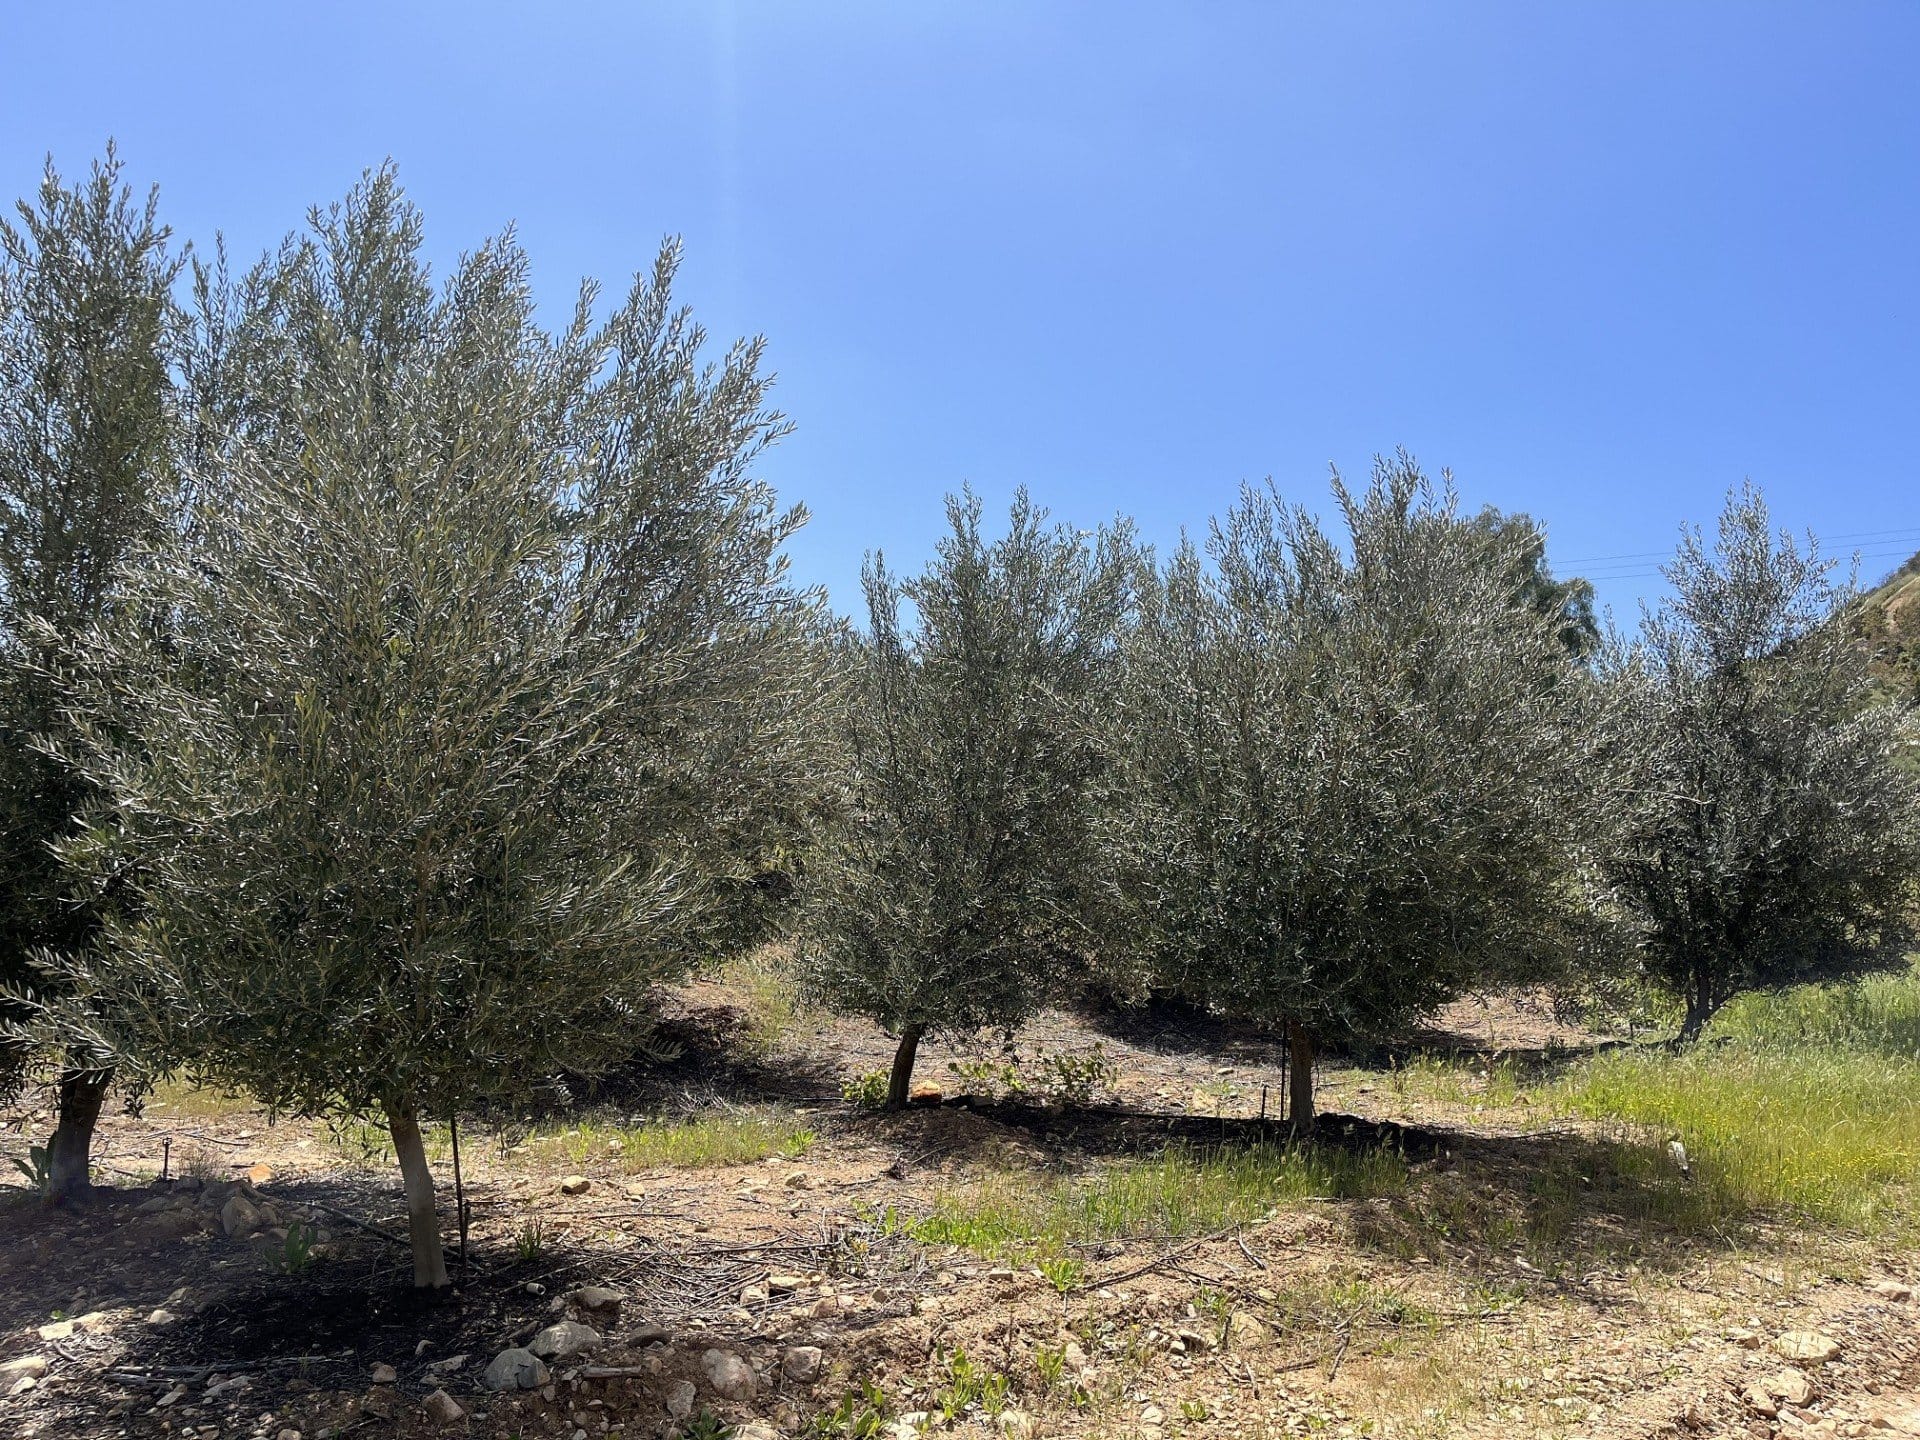 north-america-profiles-the-best-olive-oils-production-the-challenges-and-triumphs-of-taking-over-an-olive-farm-in-california-olive-oil-times